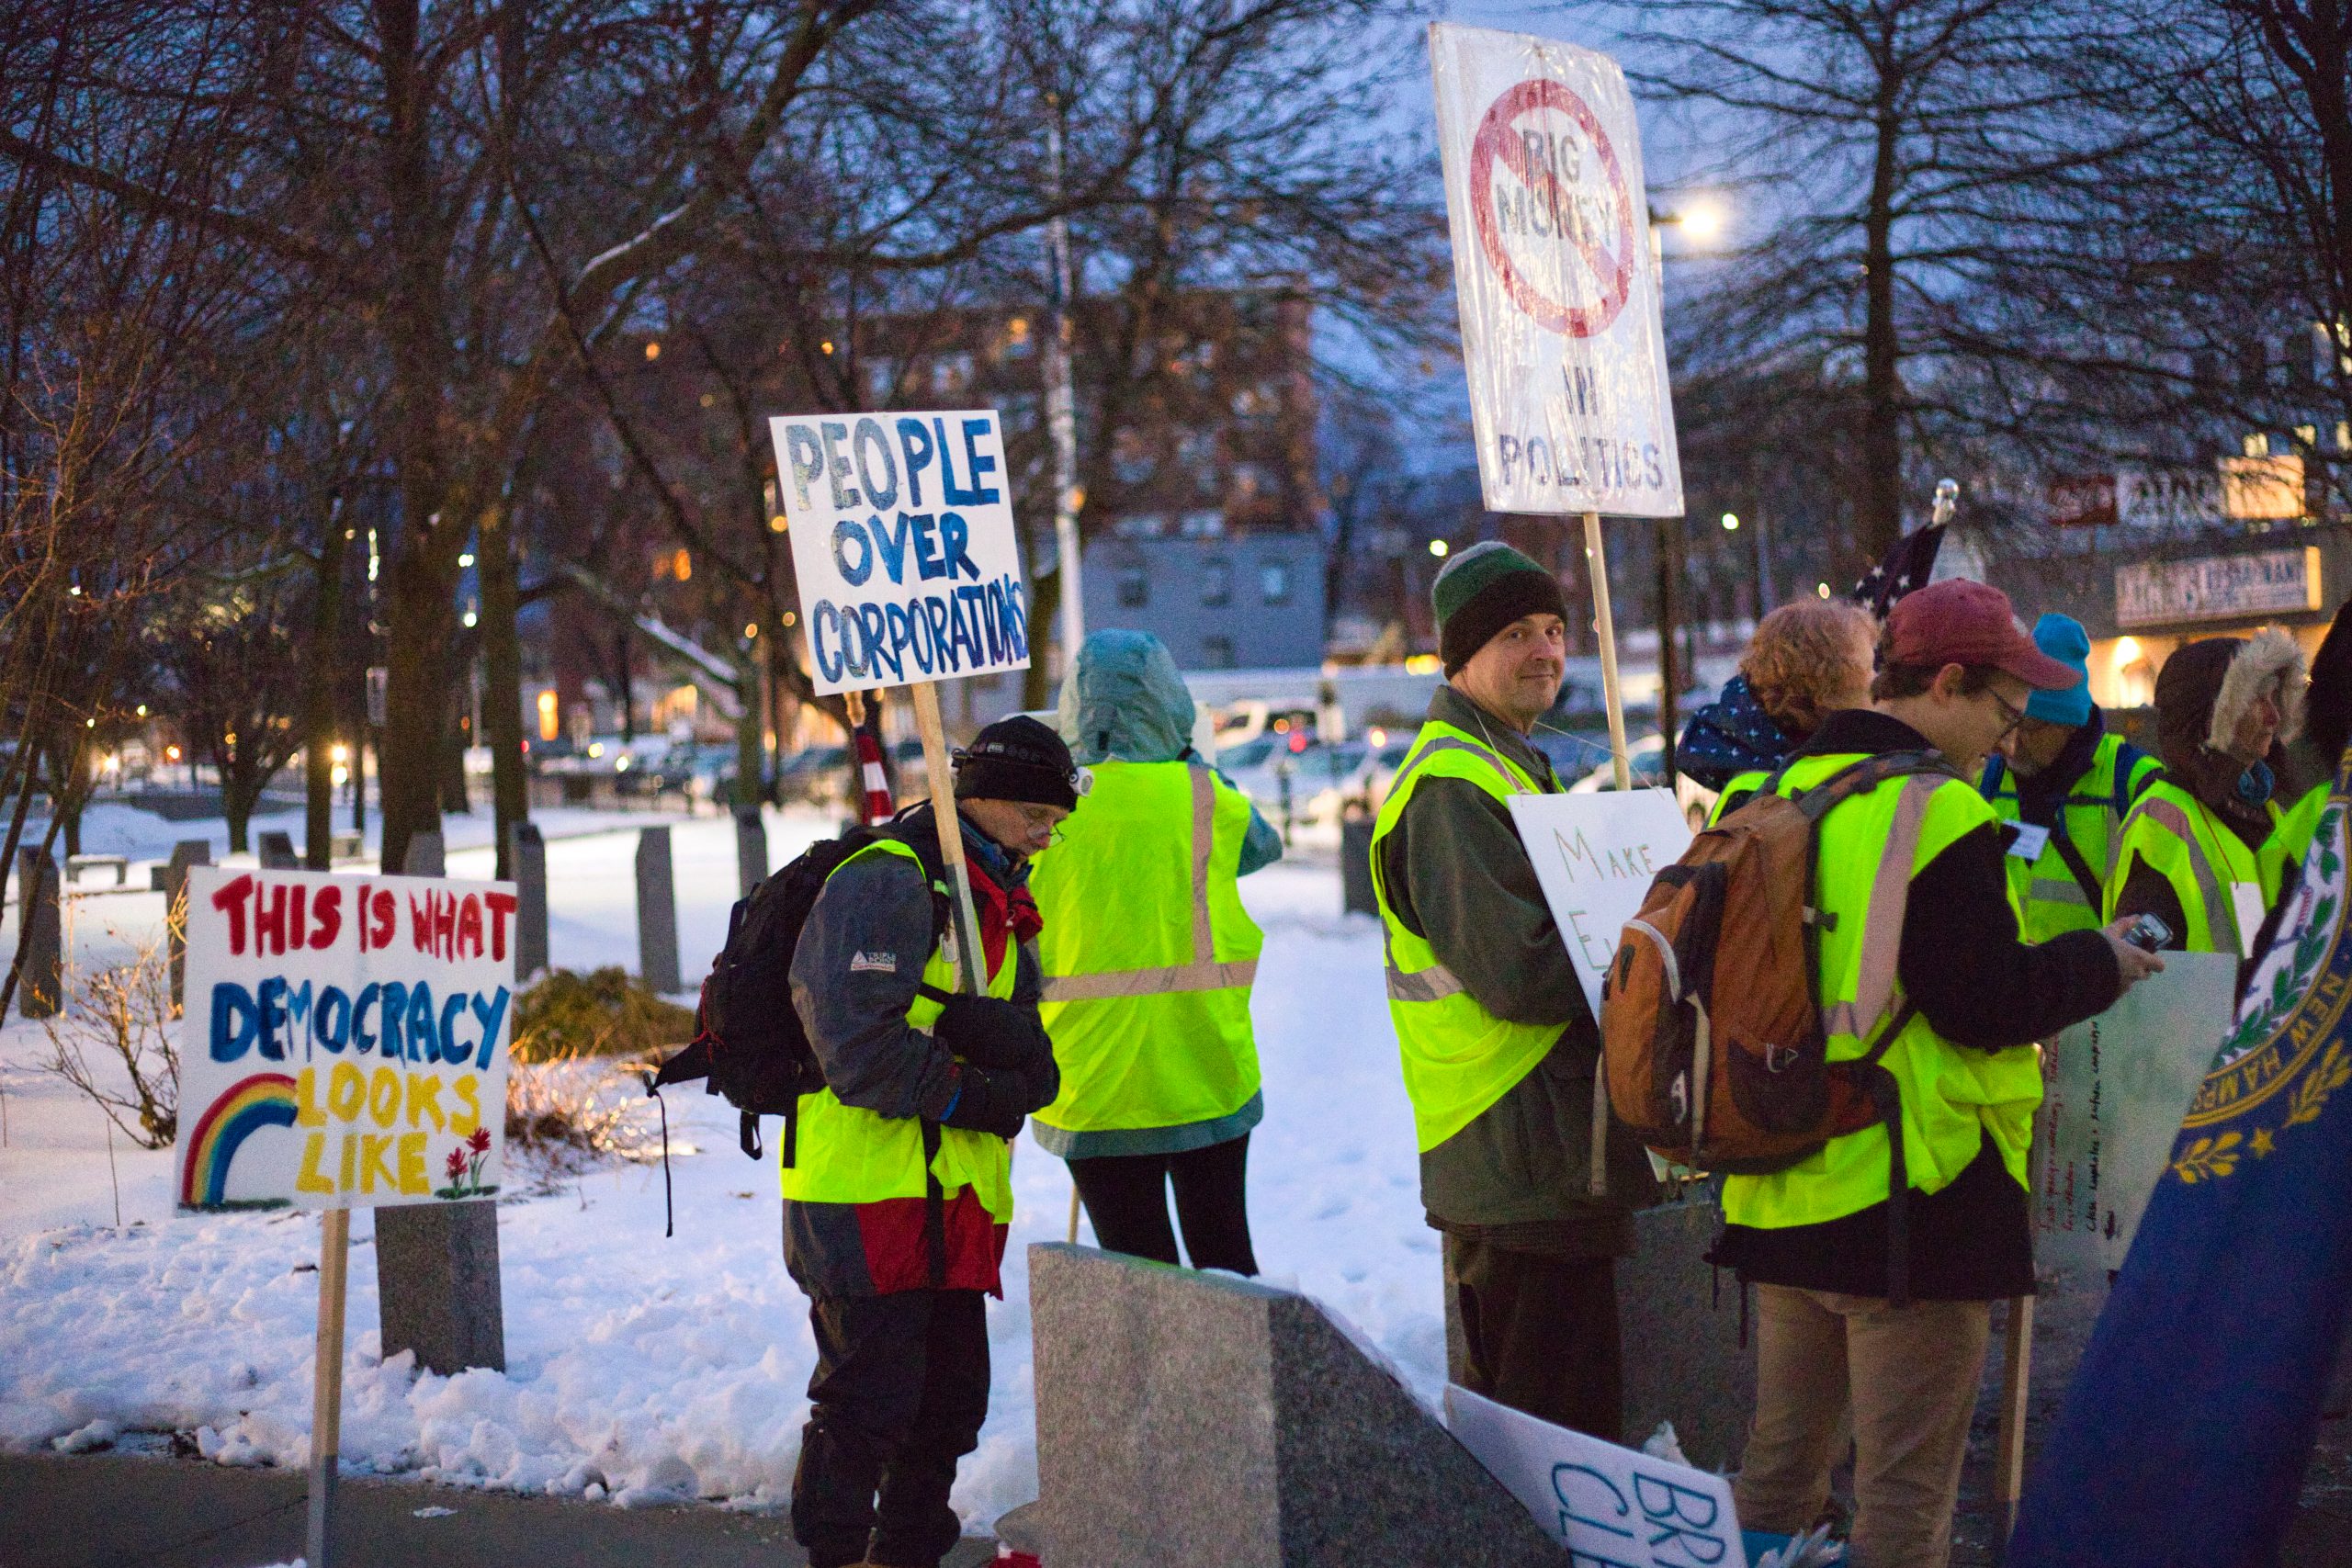 “MAKE ELECTIONS FAIR AGAIN”: PROTEST AGAINST BIG MONEY IN POLITICS RETURNS TO NEW HAMPSHIRE